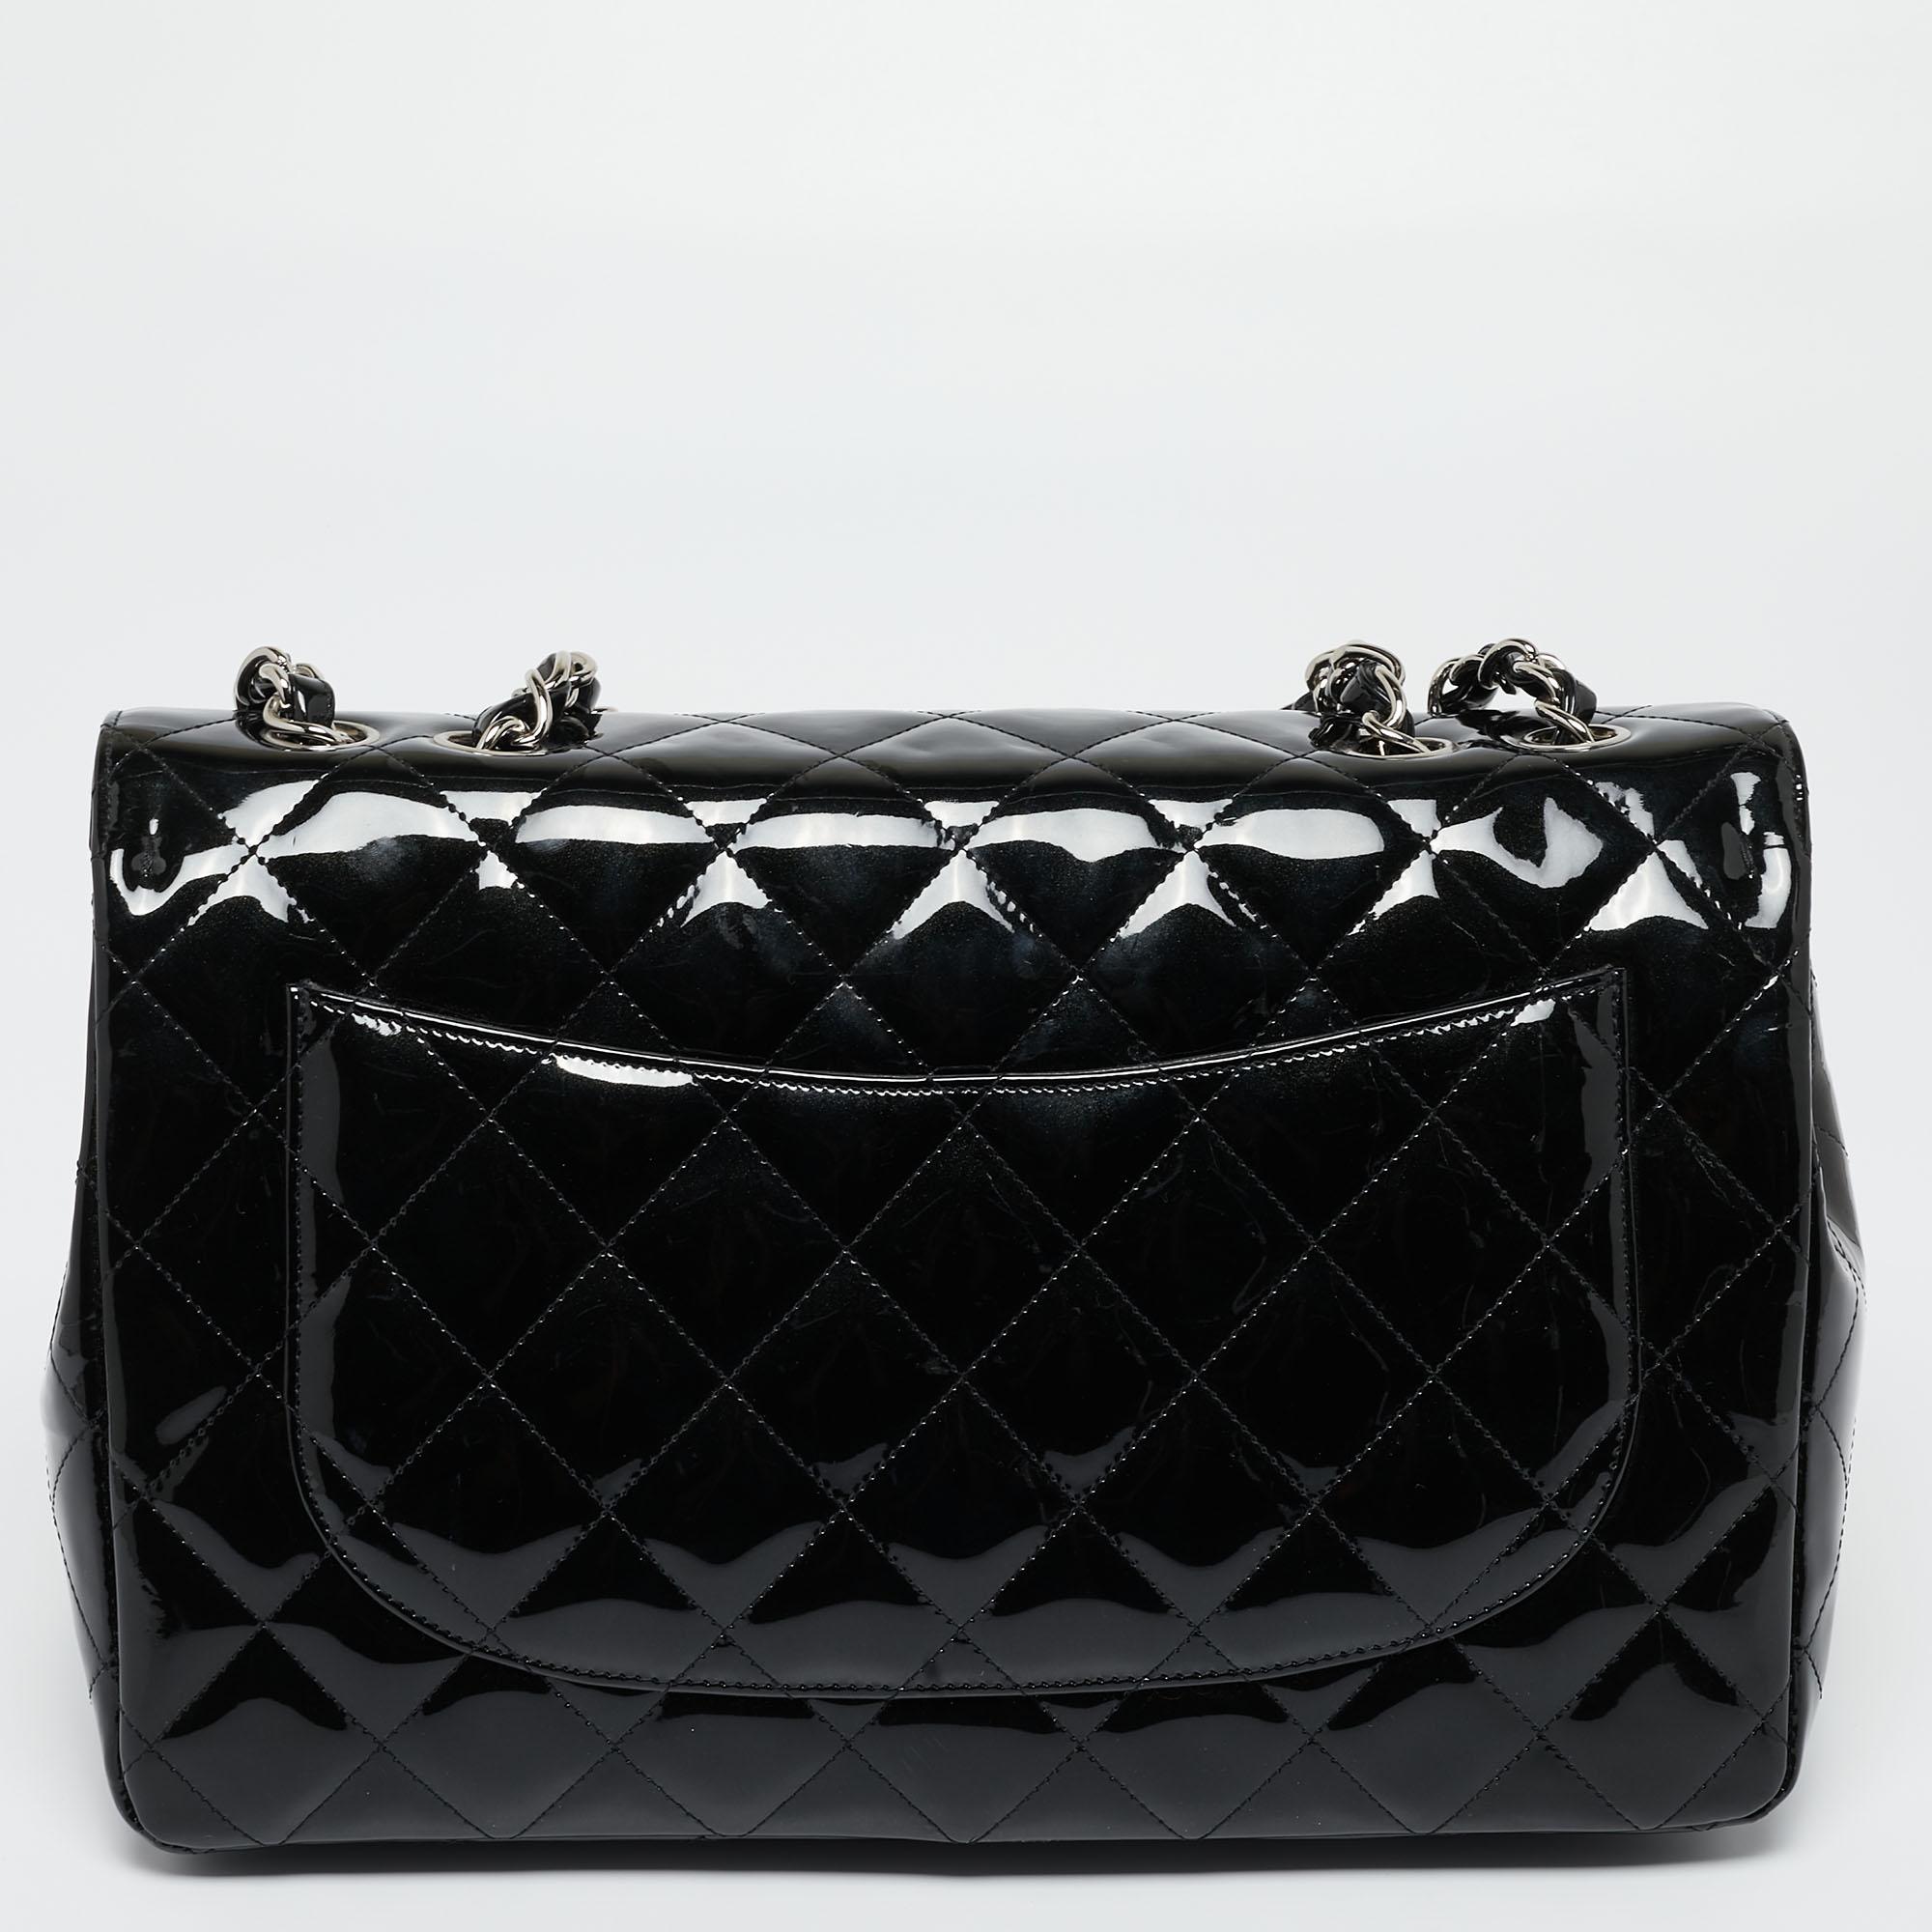 We're bringing Chanel's iconic Classic Flap bag to your closet with this creation. Exquisitely crafted from quilted patent leather, it bears the signature label inside the leather interior and the iconic CC turn-lock on the flap. The black Chanel